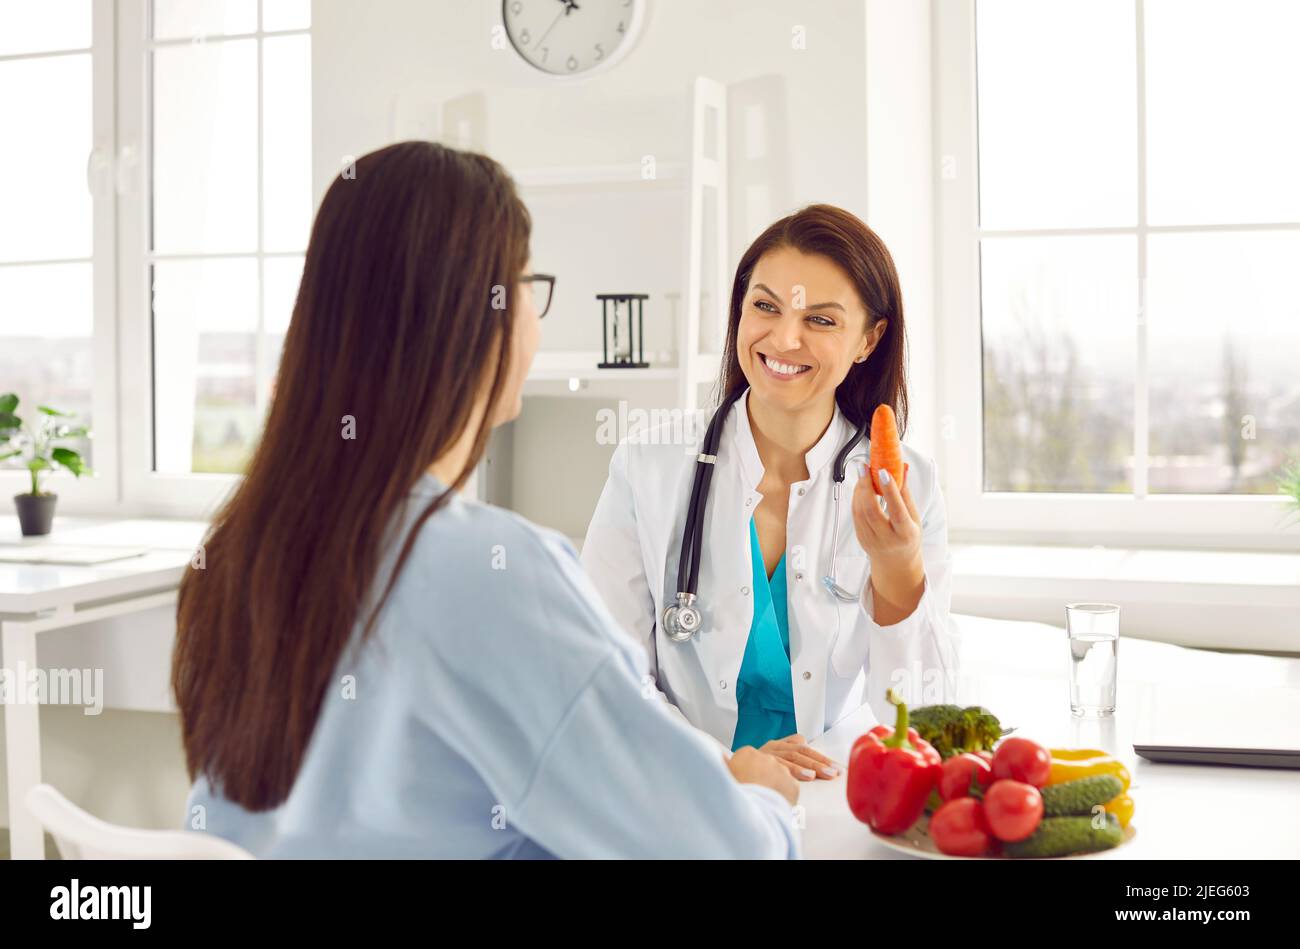 Woman doctor nutritionist talking patient about benefits of proper nutrition or vegetarianism Stock Photo